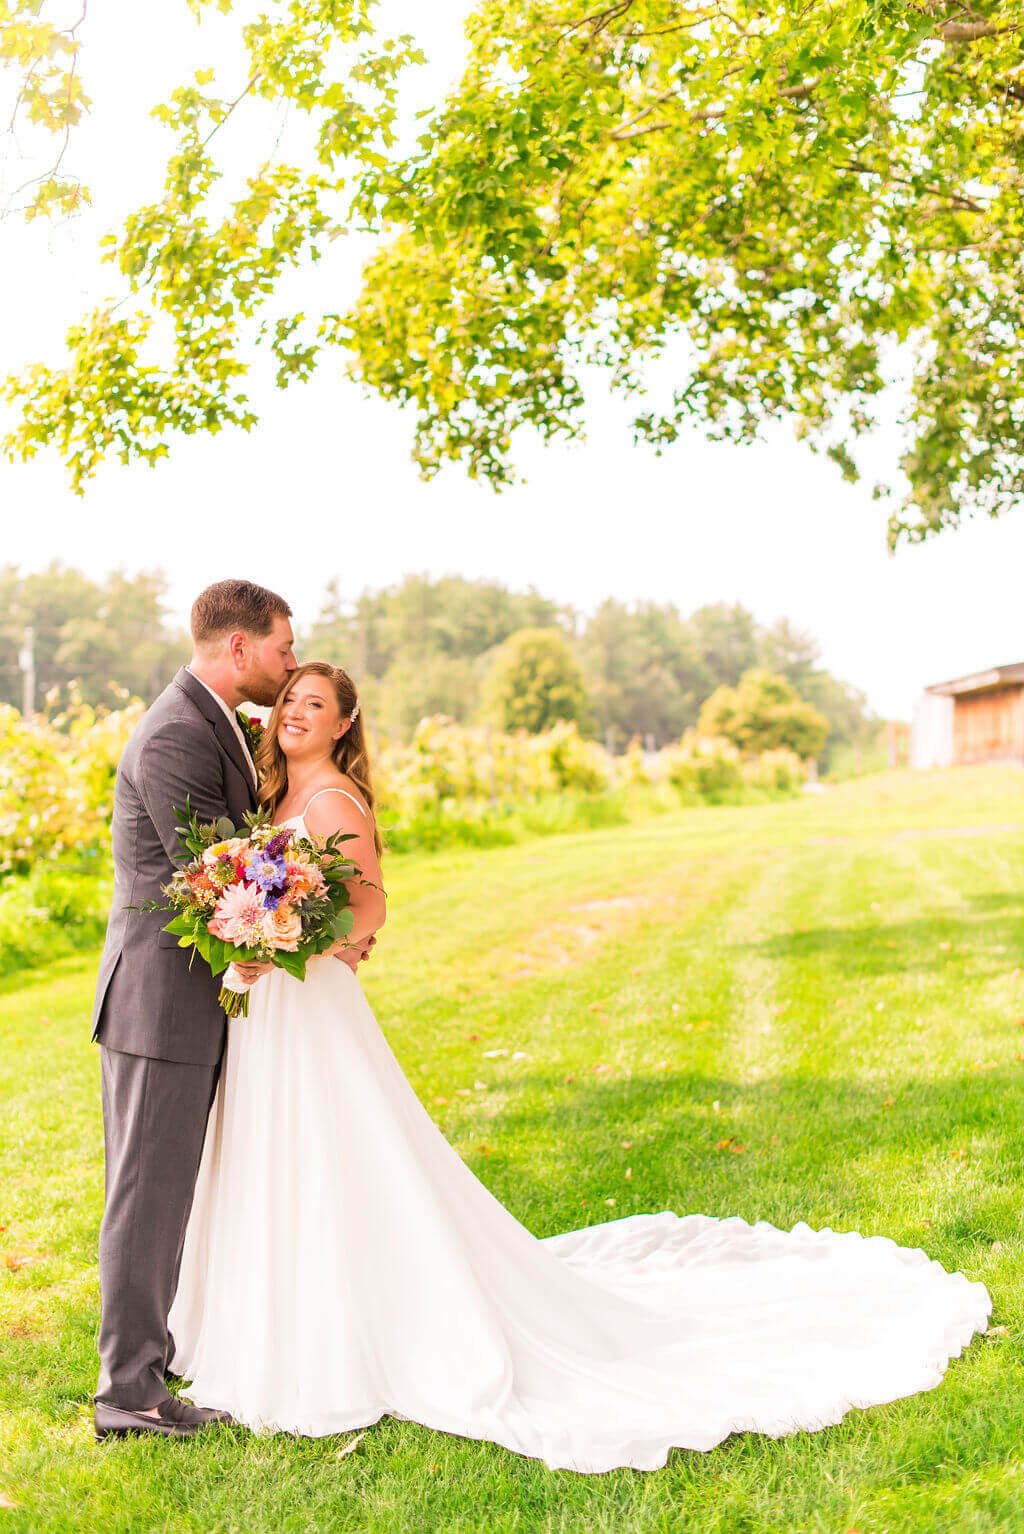 Rachel and Alec Wedding at Flag Hill Distillery and Winery